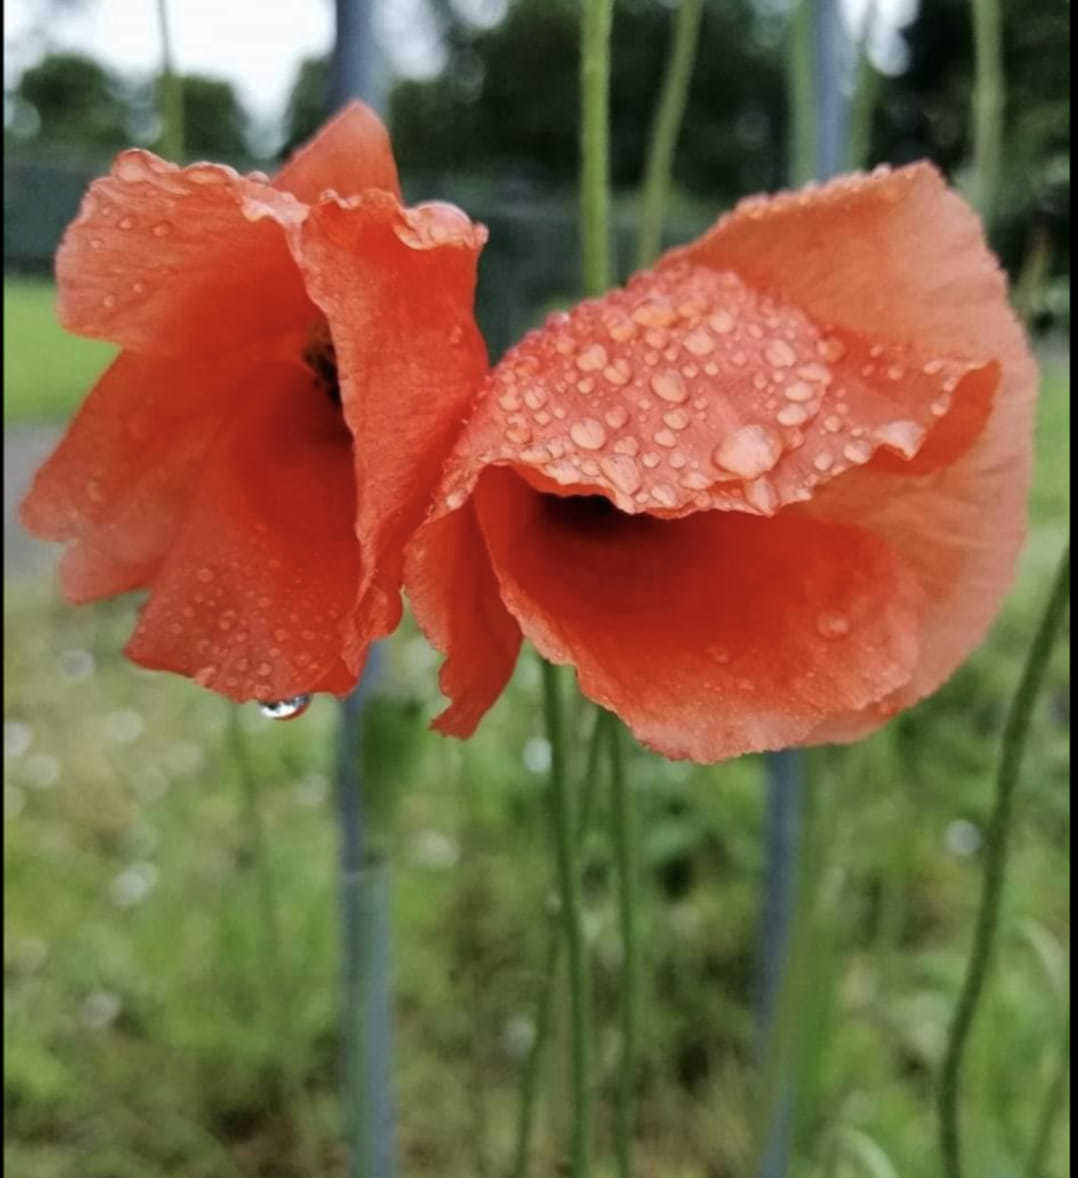 Raindrops on poppies by Lisa Lacking